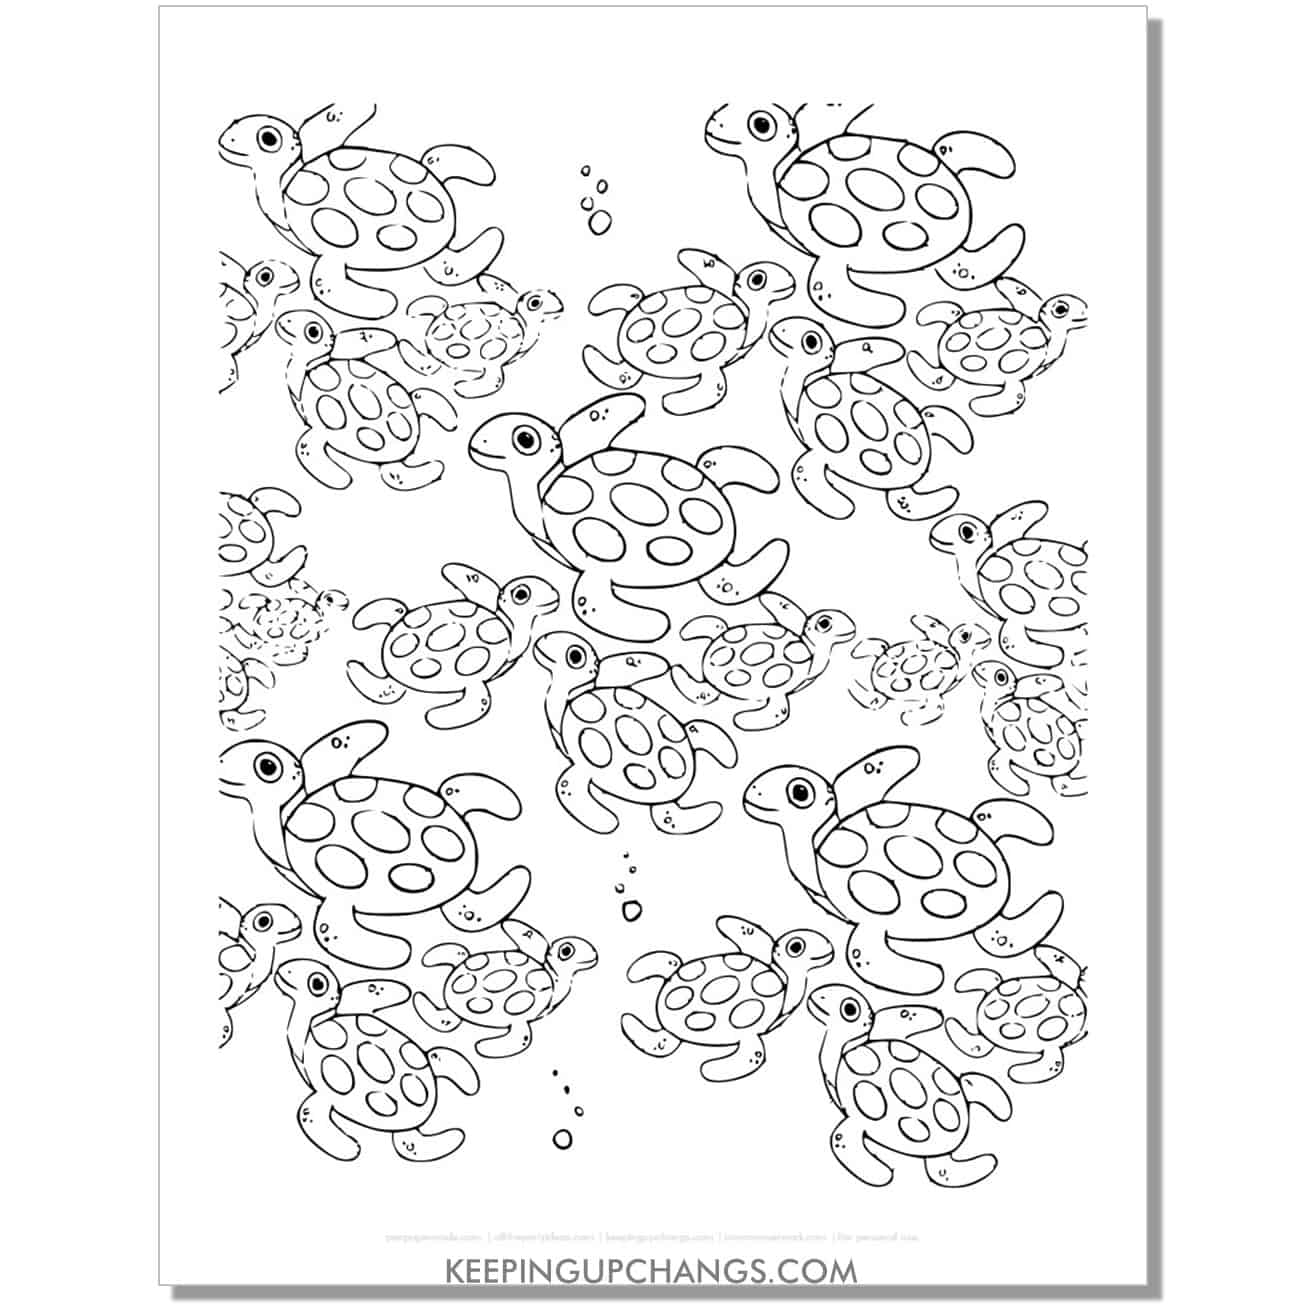 free hand drawn turtle collage coloring page, sheet.